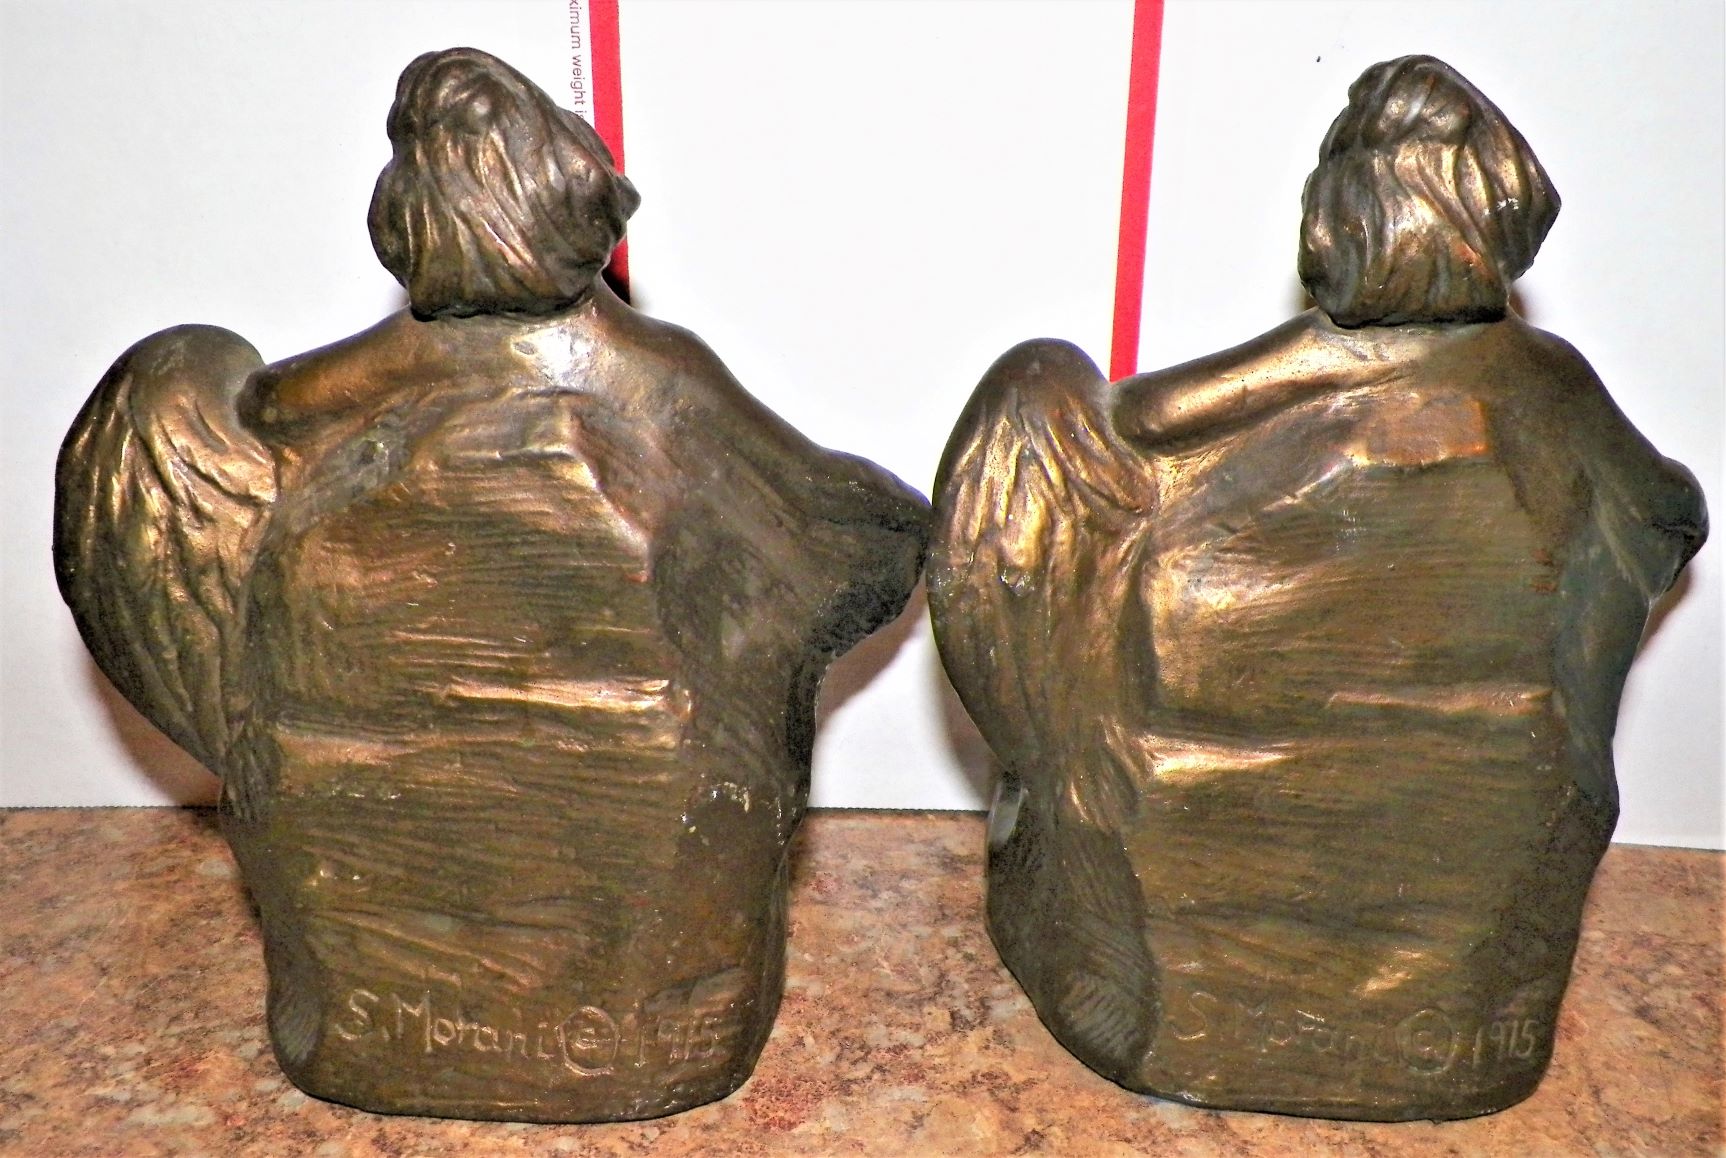 COLLECTIBLE BOOKENDS S MORANI 1915  4AA.JPG